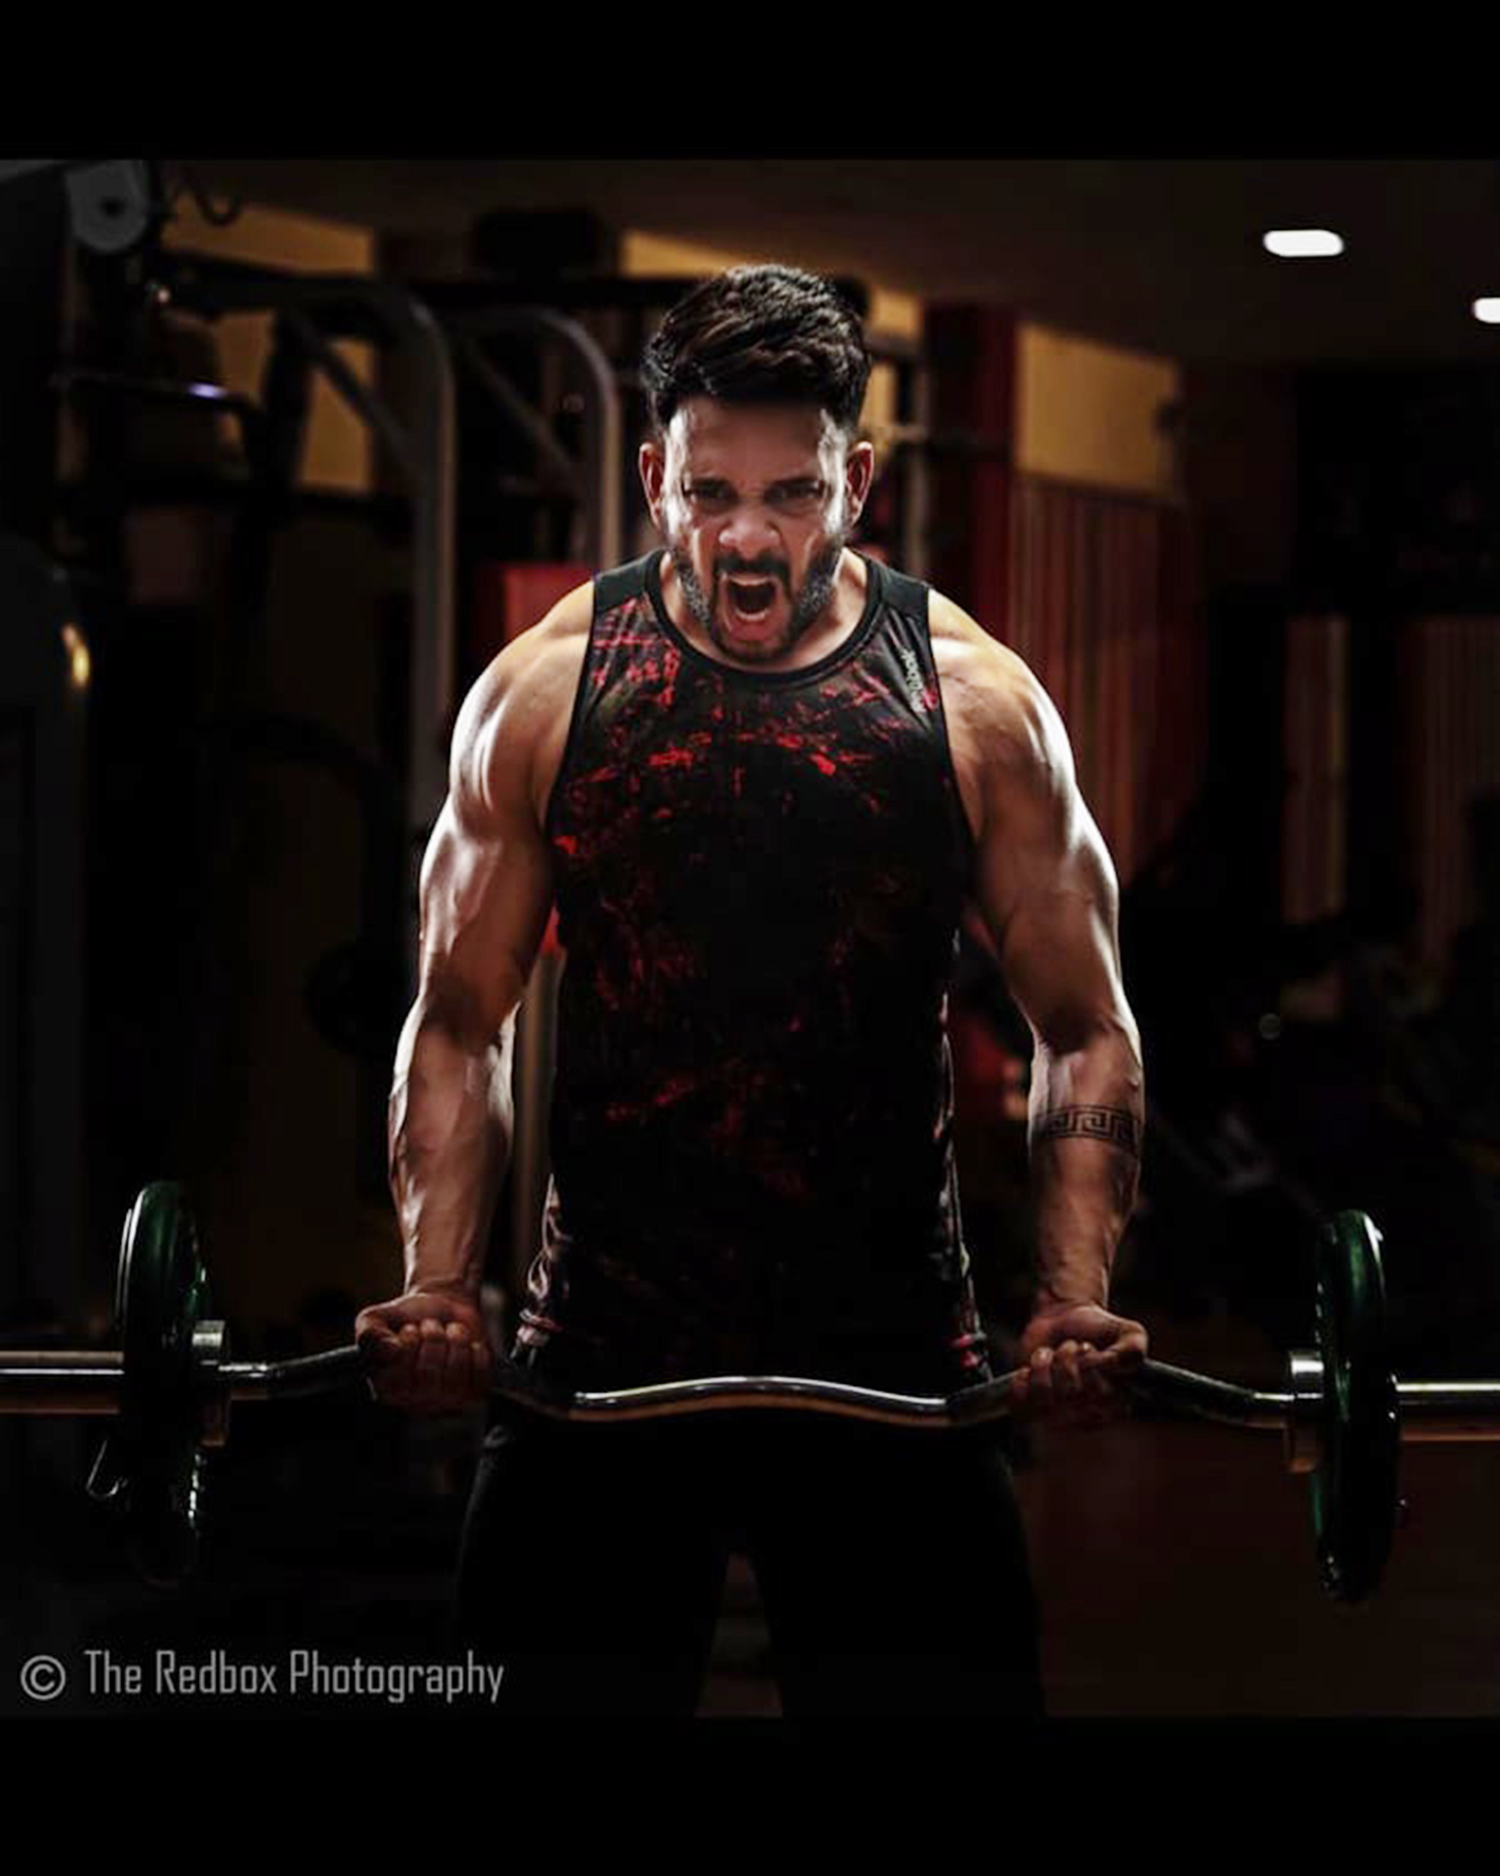 south indian actor bharath gym workout pics,tamil actor bharath gym pics,actor bharath new gym pics,actor bharath latest news,tamil film actor,tamil film news,kollywood actor